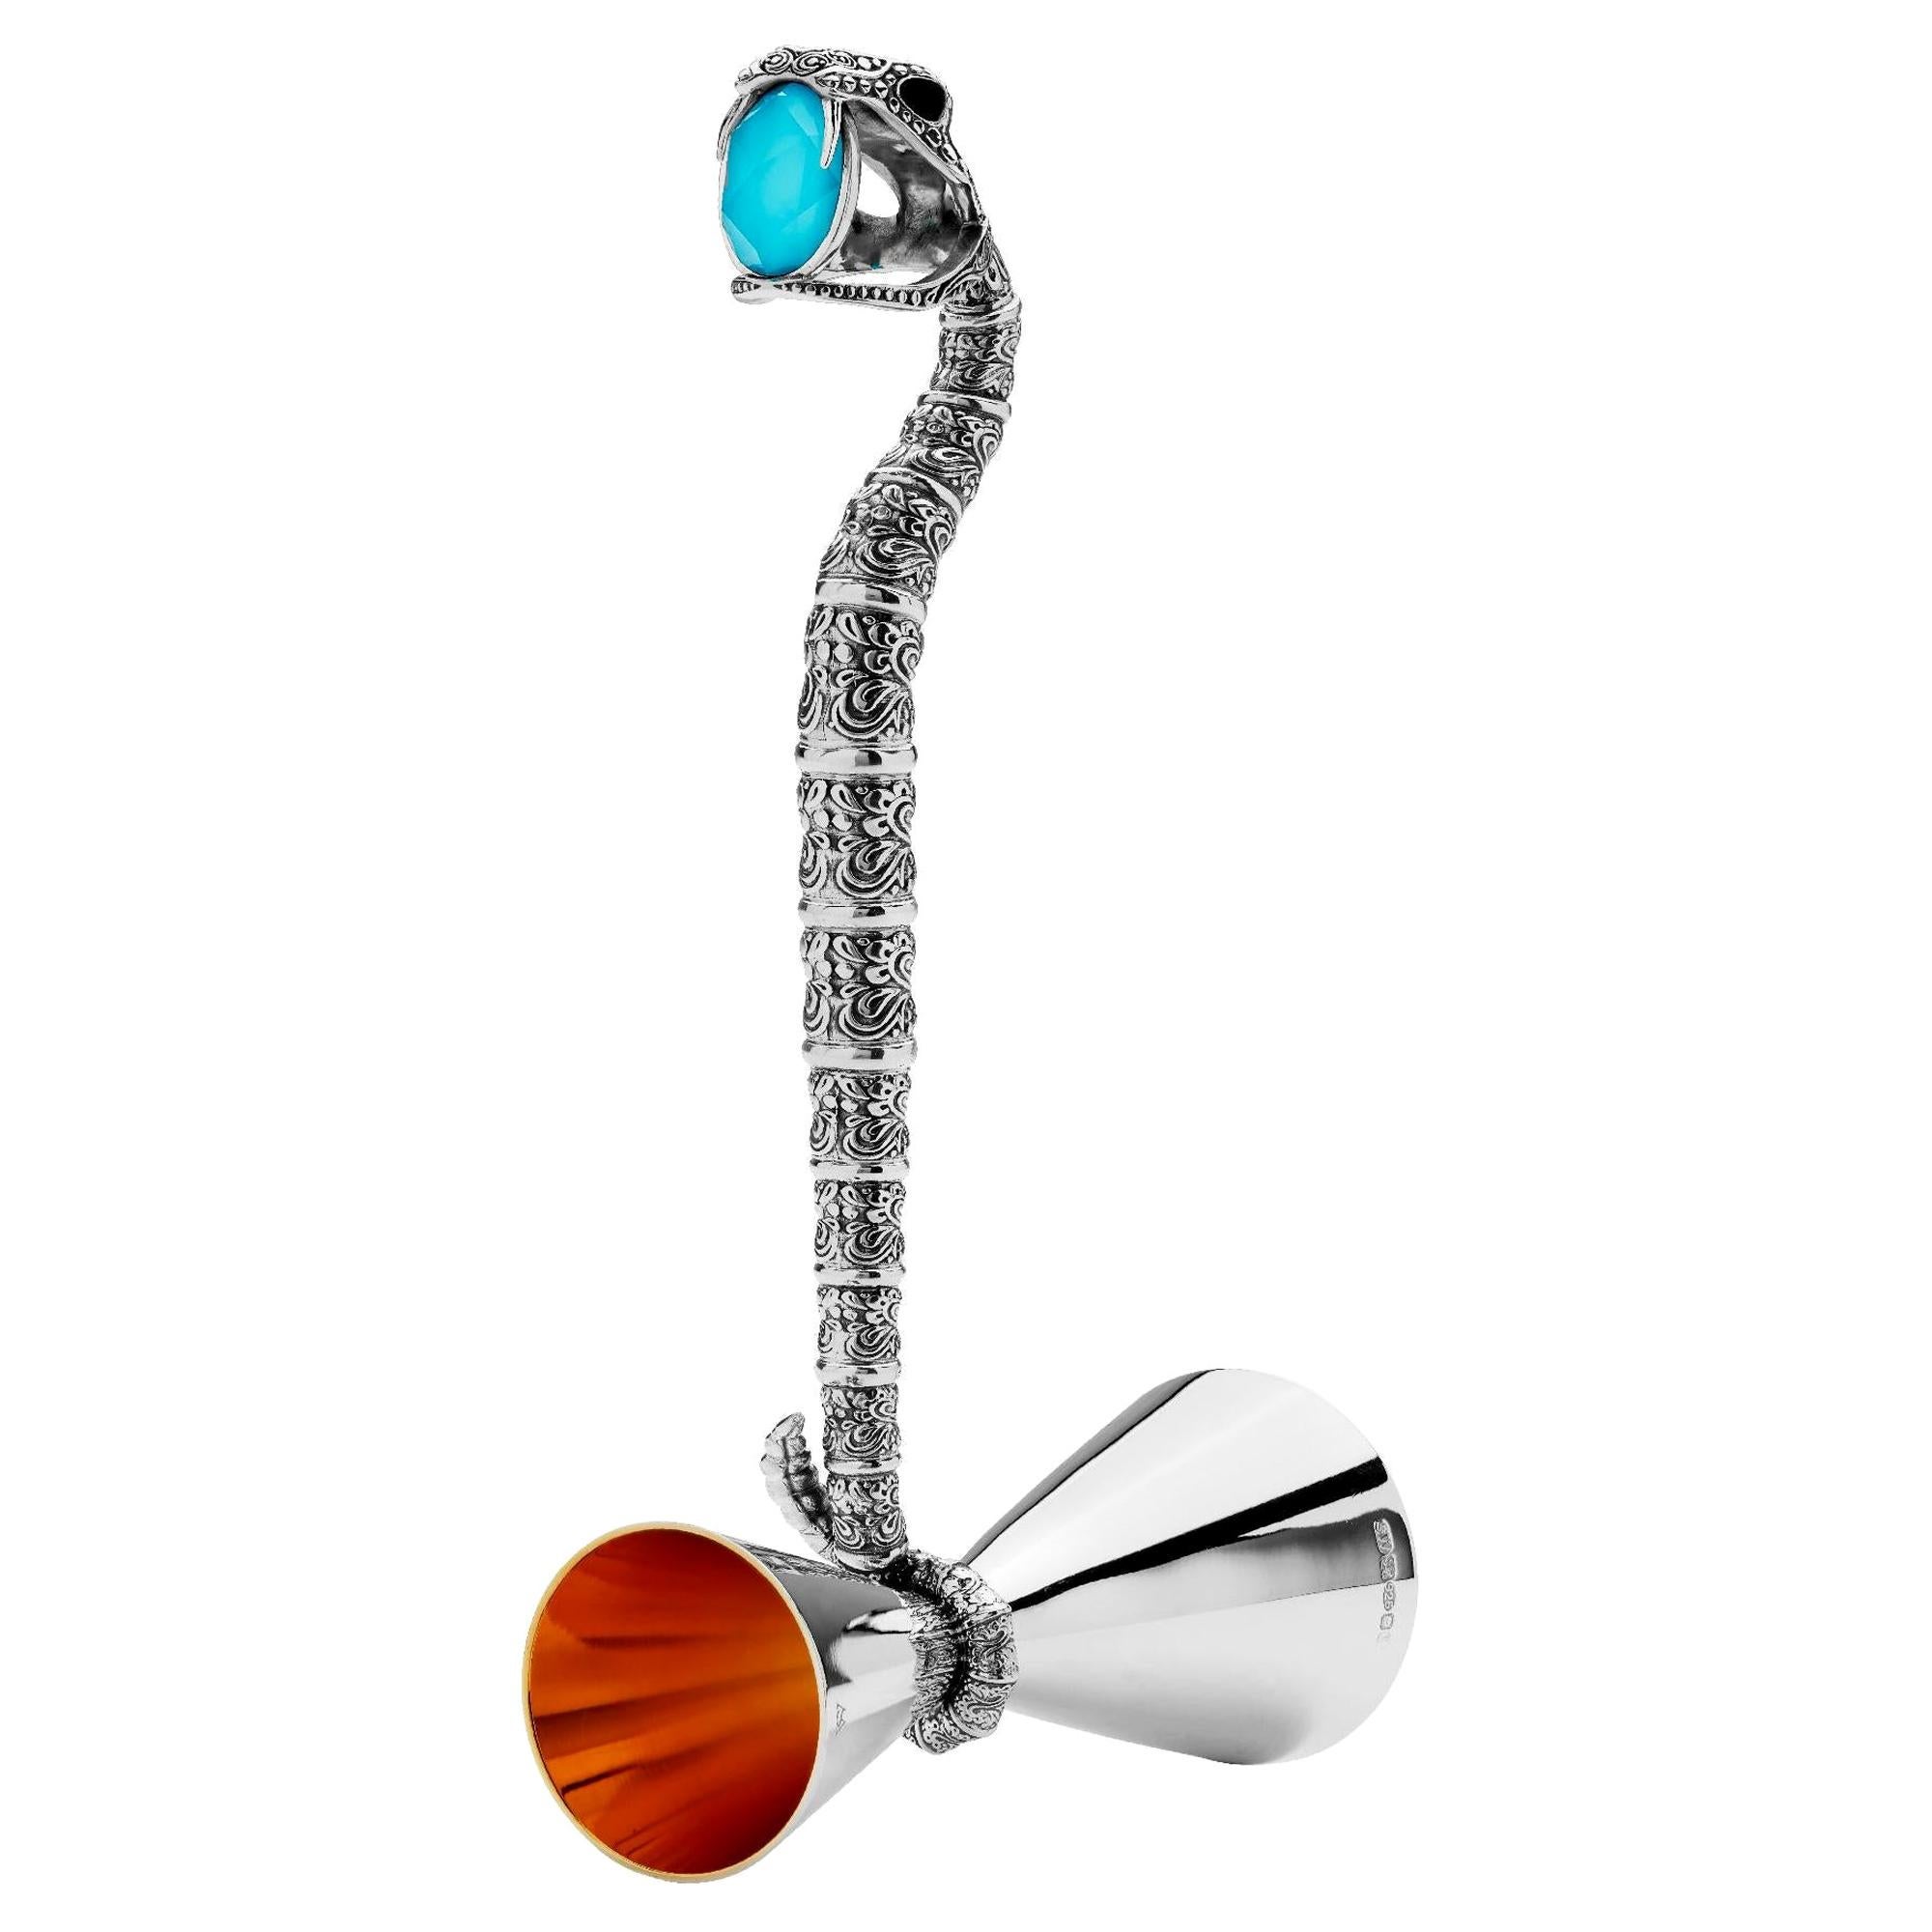 Stephen Webster Tequila Lore Snake Silver Measurer with Turquoise Crystal Haze For Sale